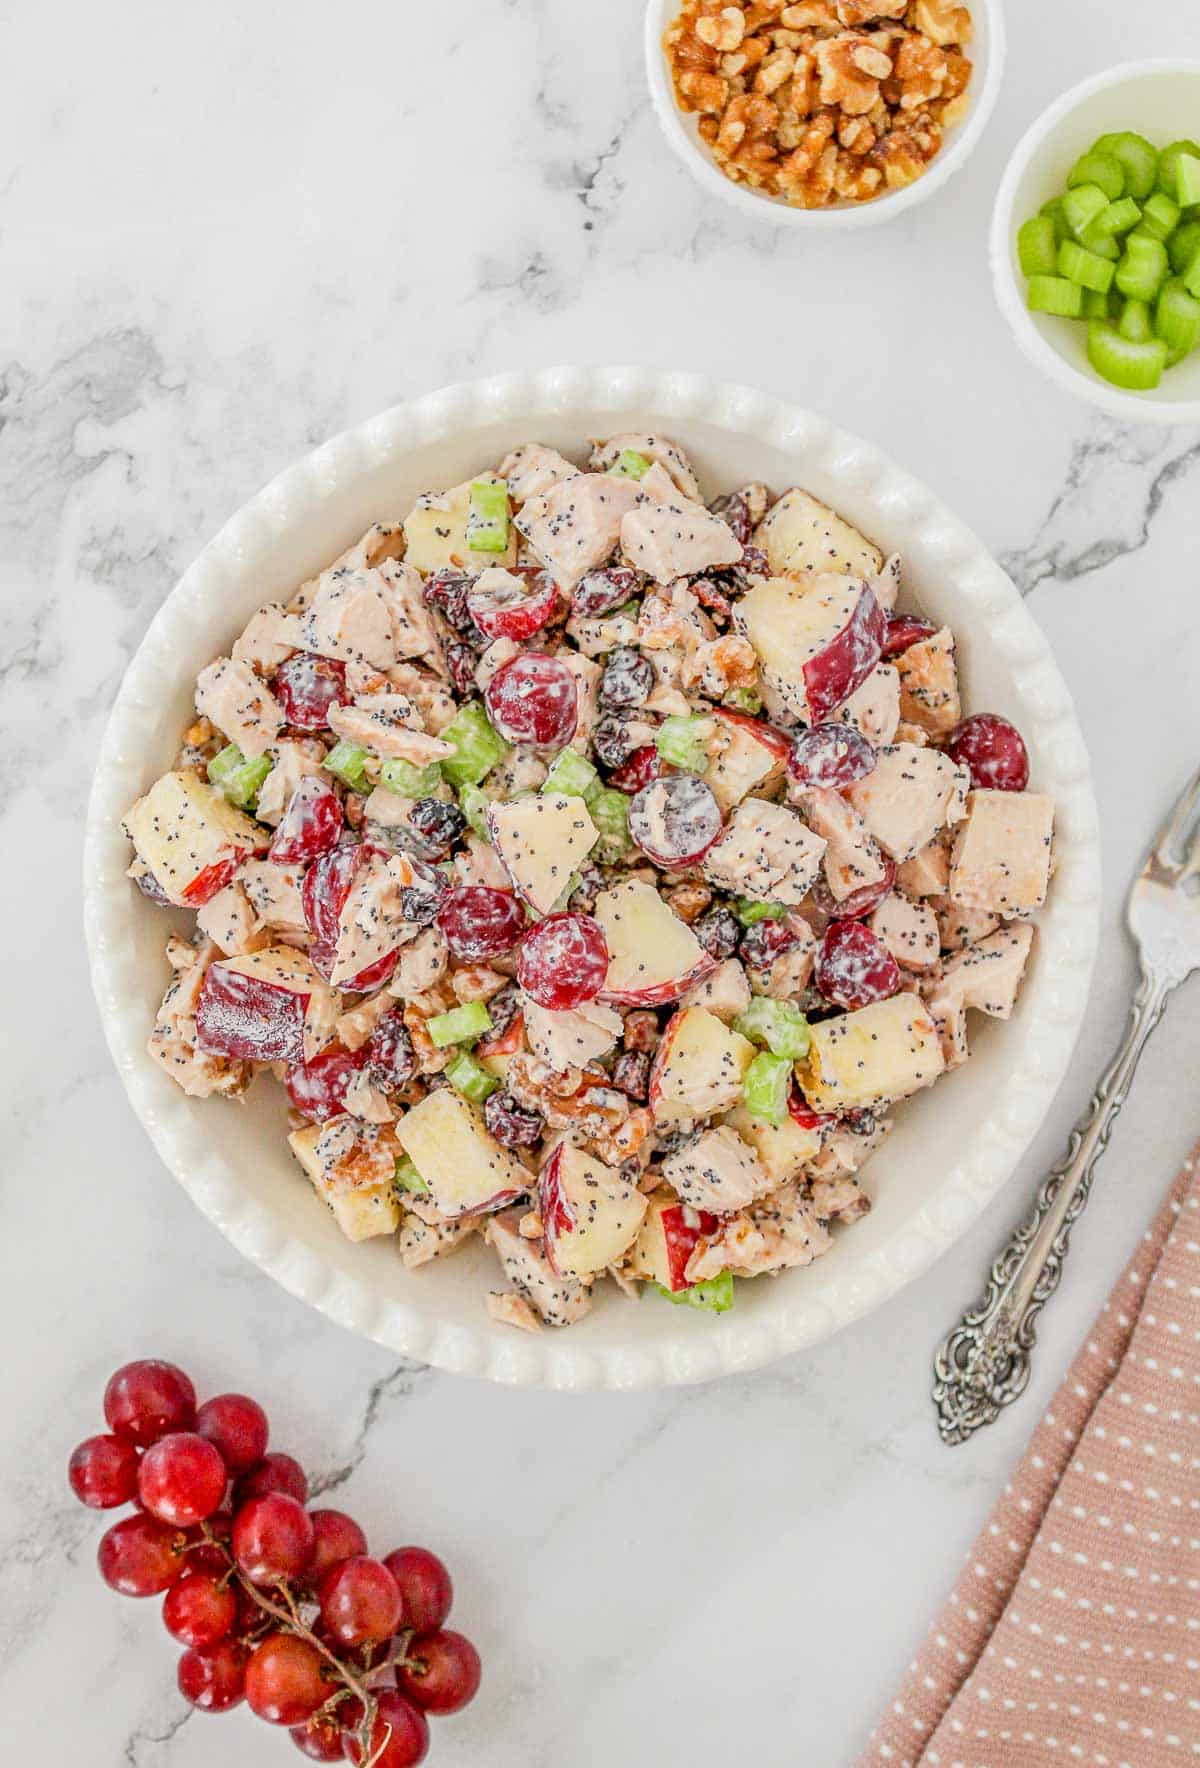 Chicken salad with grapes served in a white bowl.